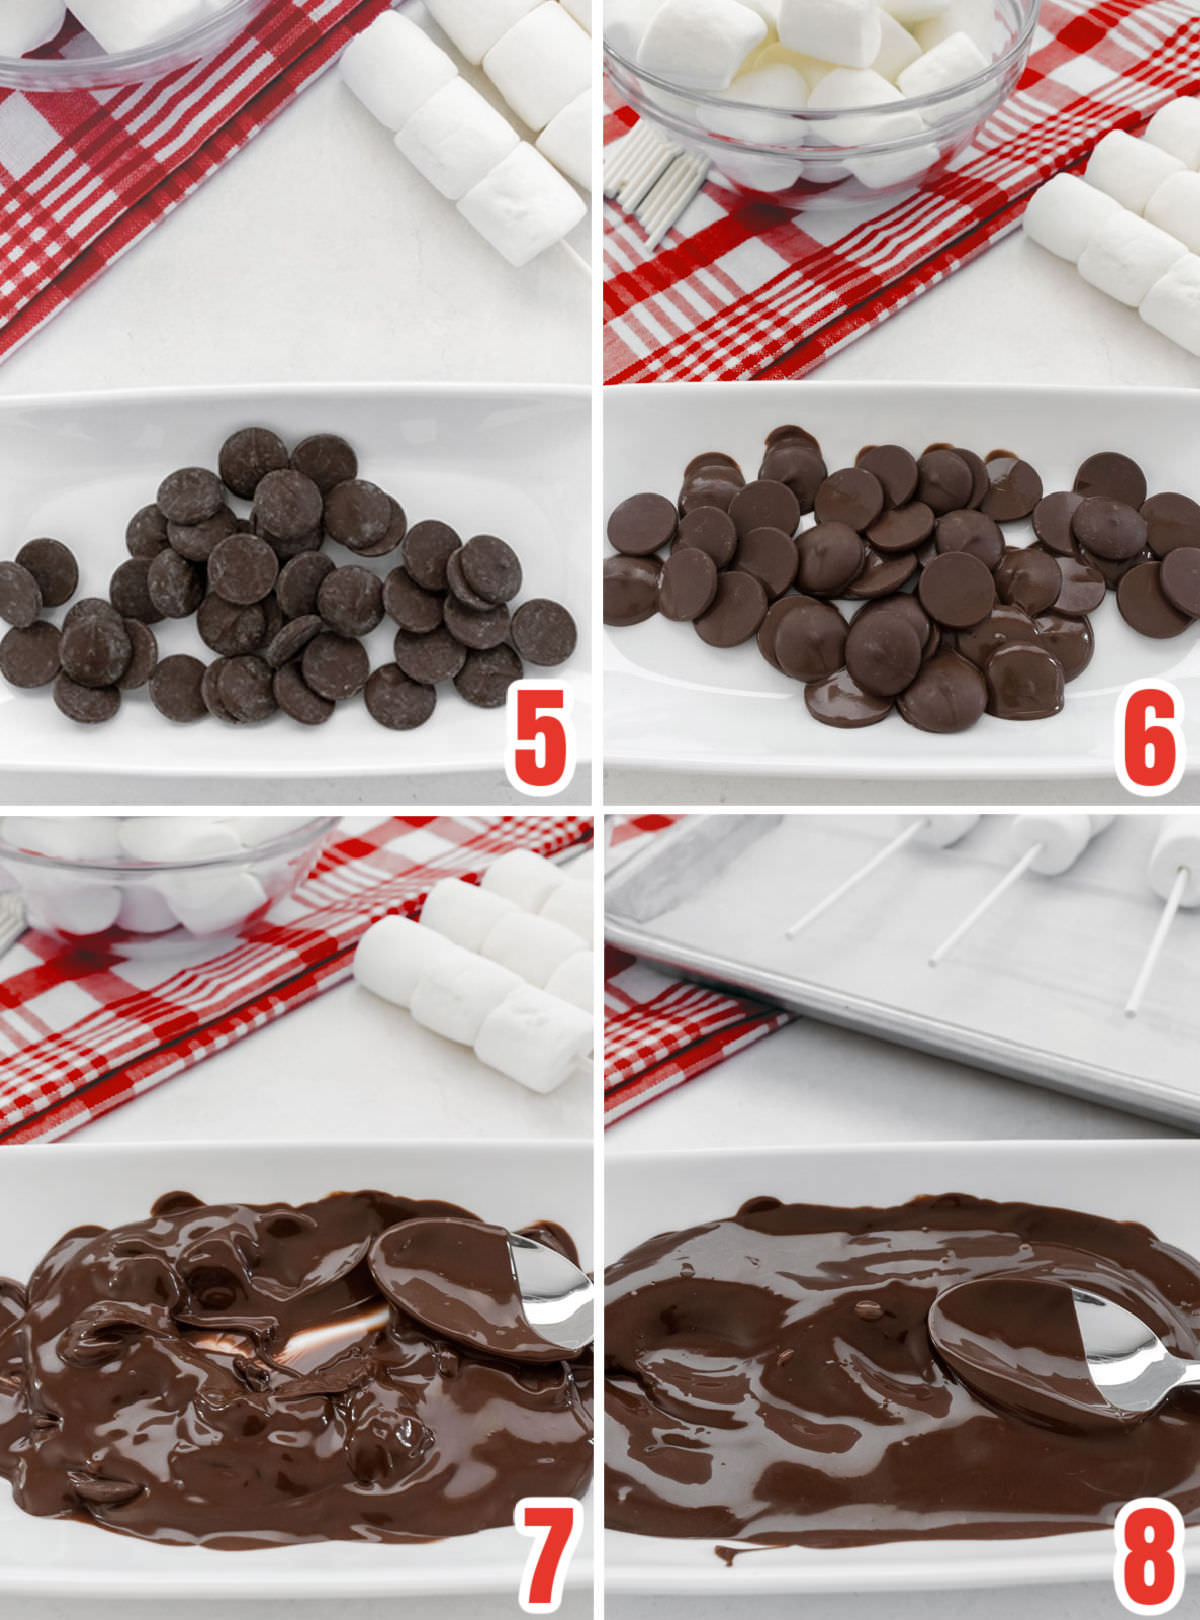 Collage image showing the steps required to melt chocolate for dipping.